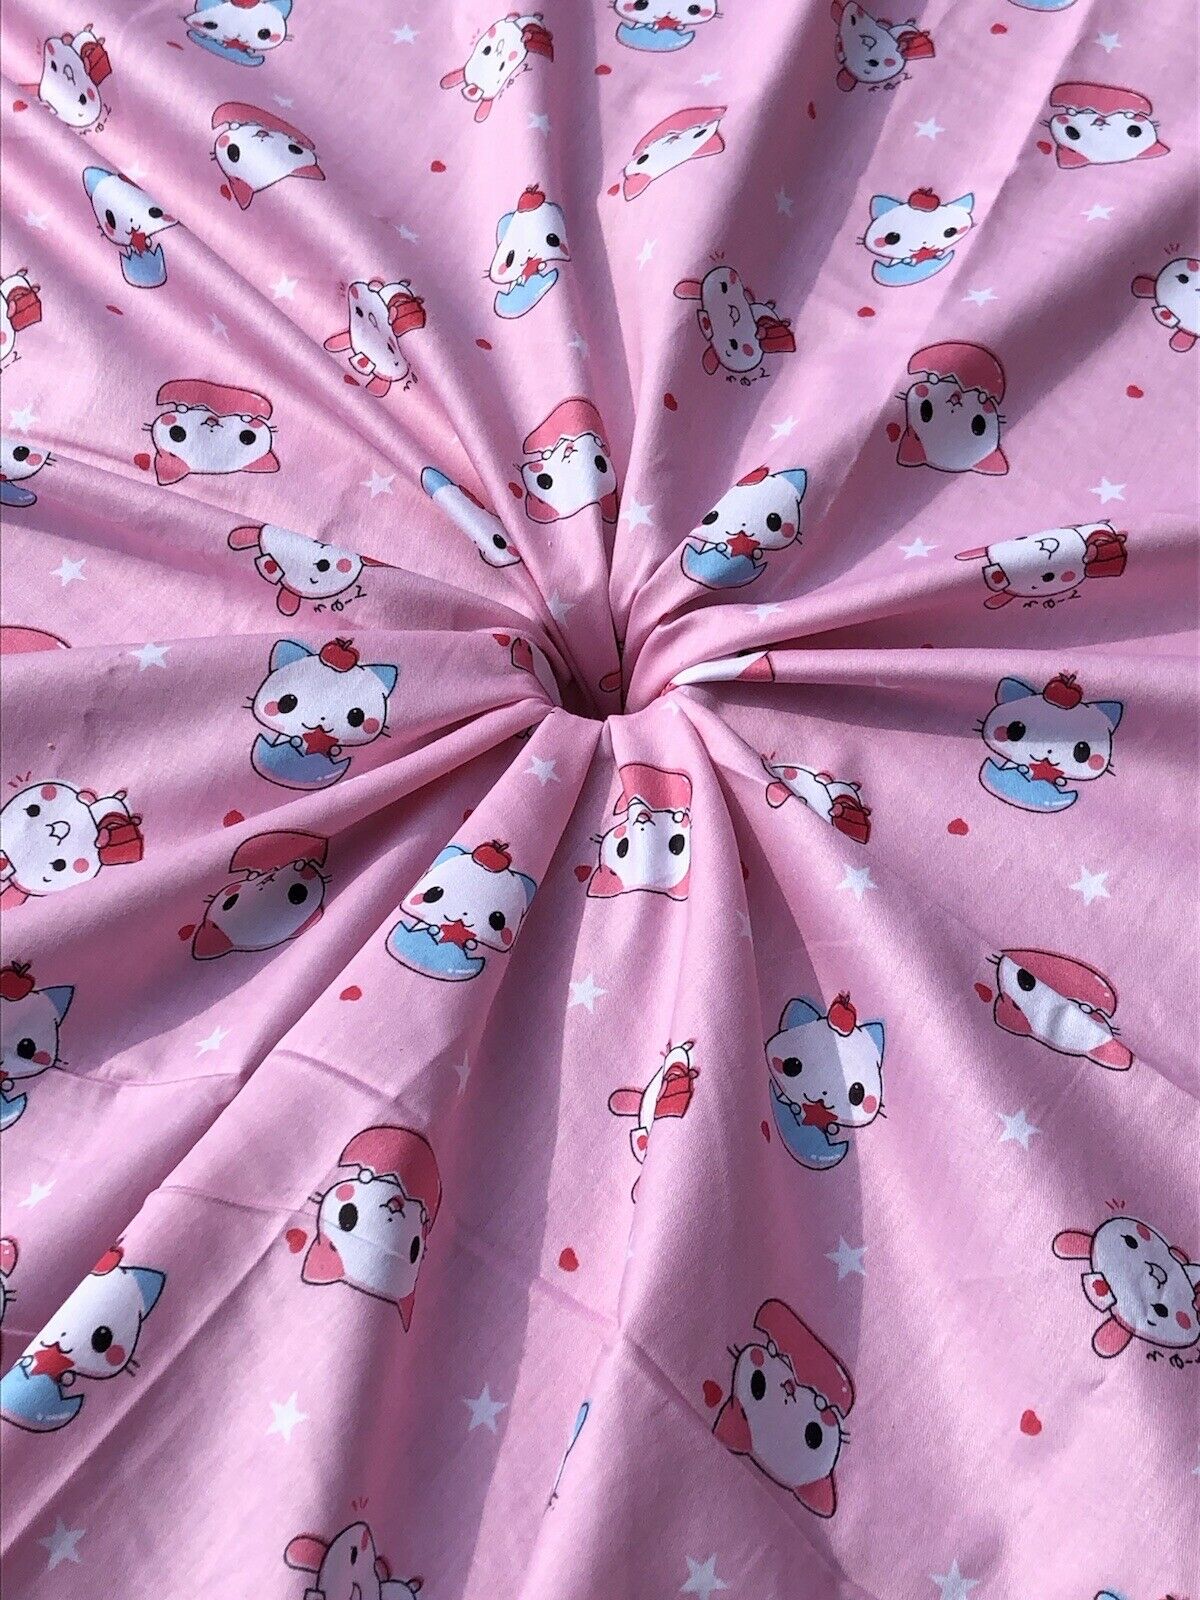 Very Cute Small Cup Kitty Cotton Fabric